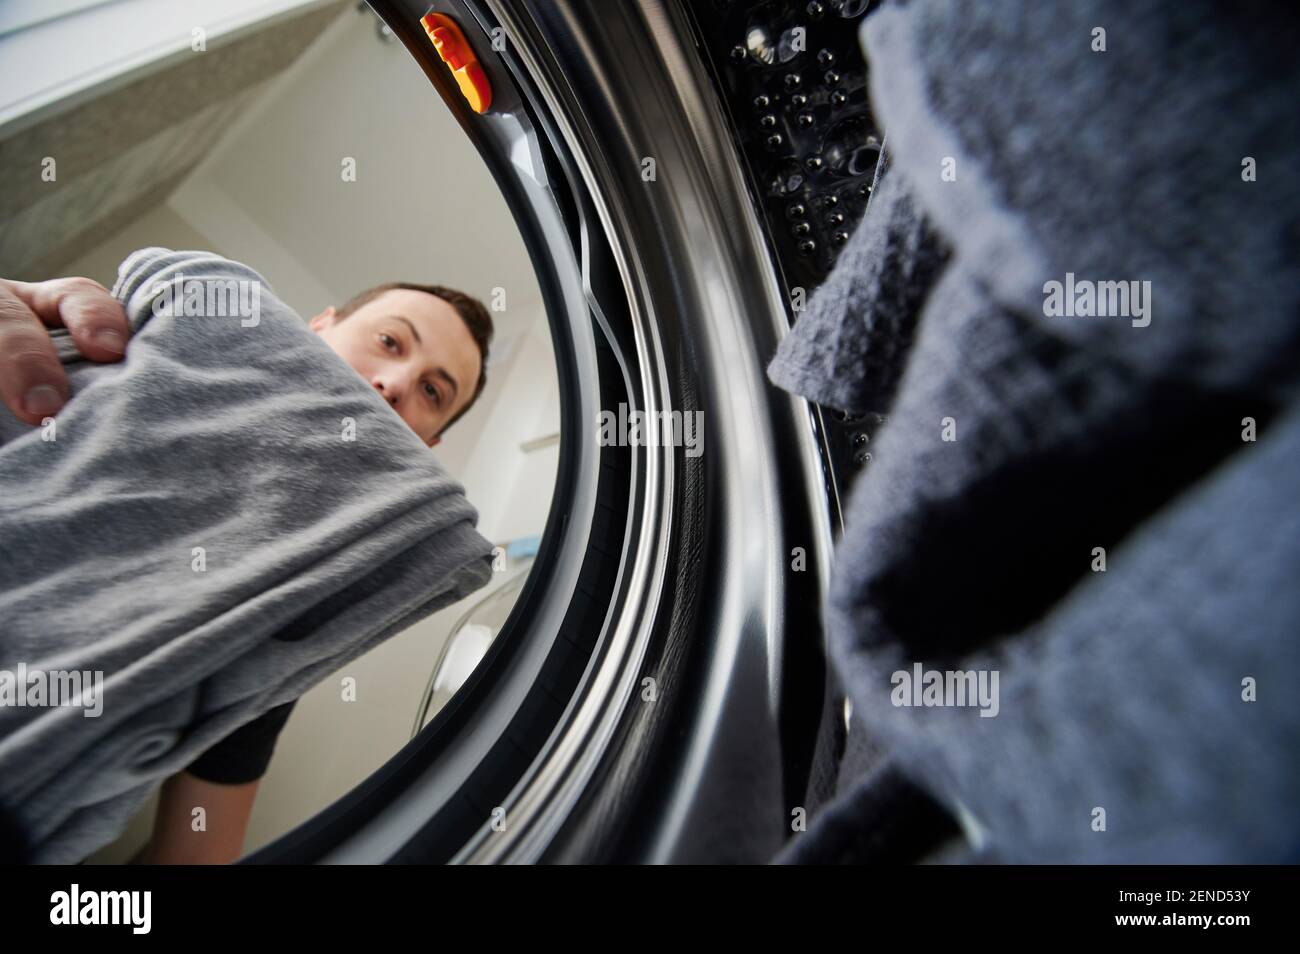 Man loading dirty cloth to washing machine view from inside Stock Photo